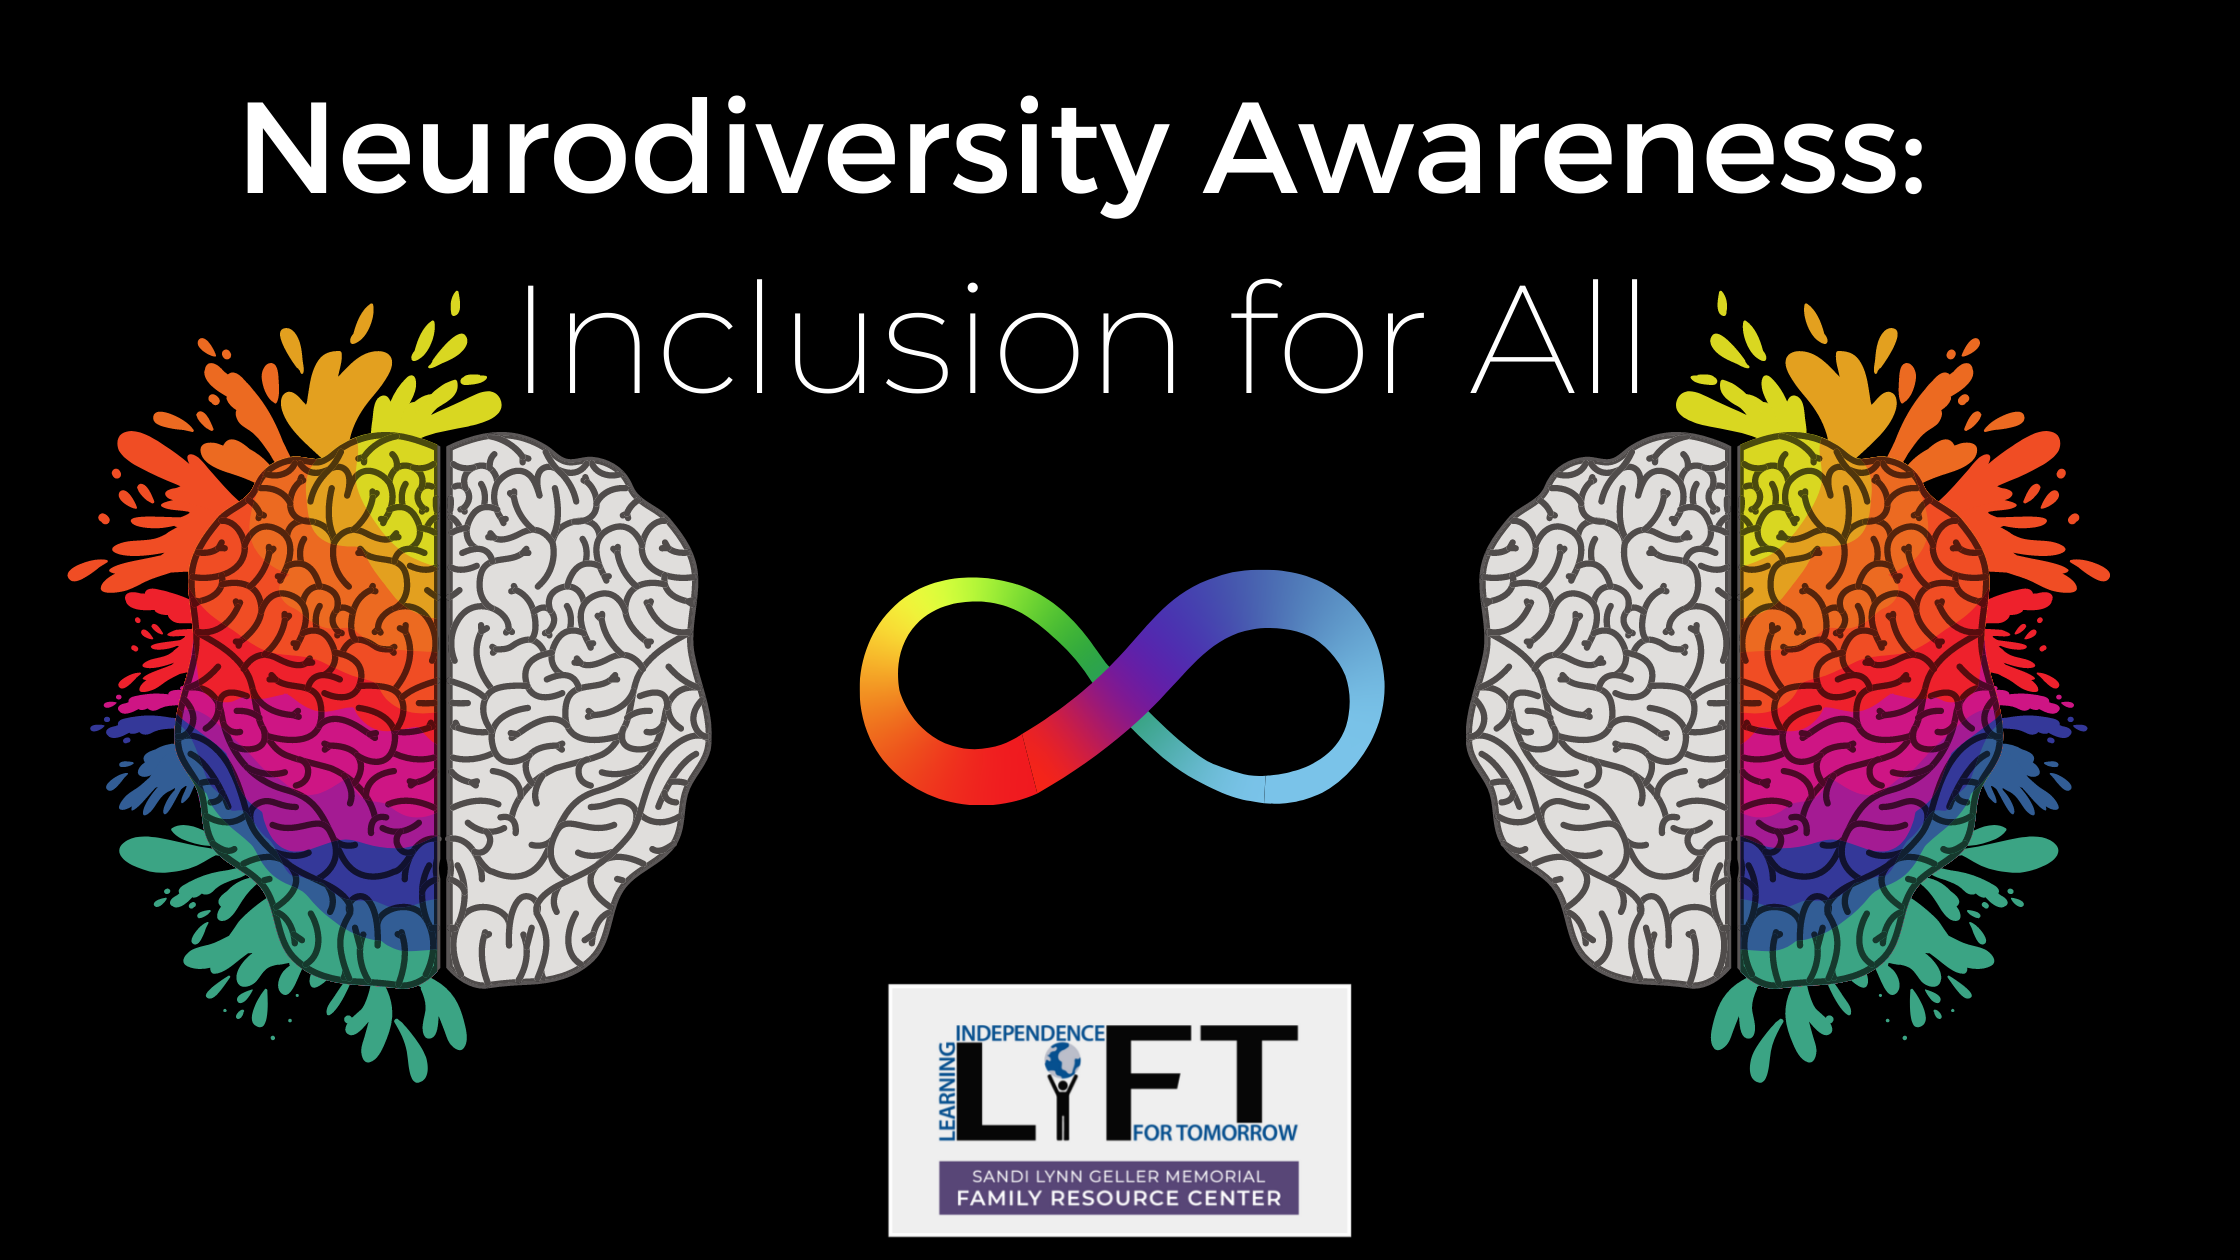 Neurodiversity Awareness: Inclusion for All